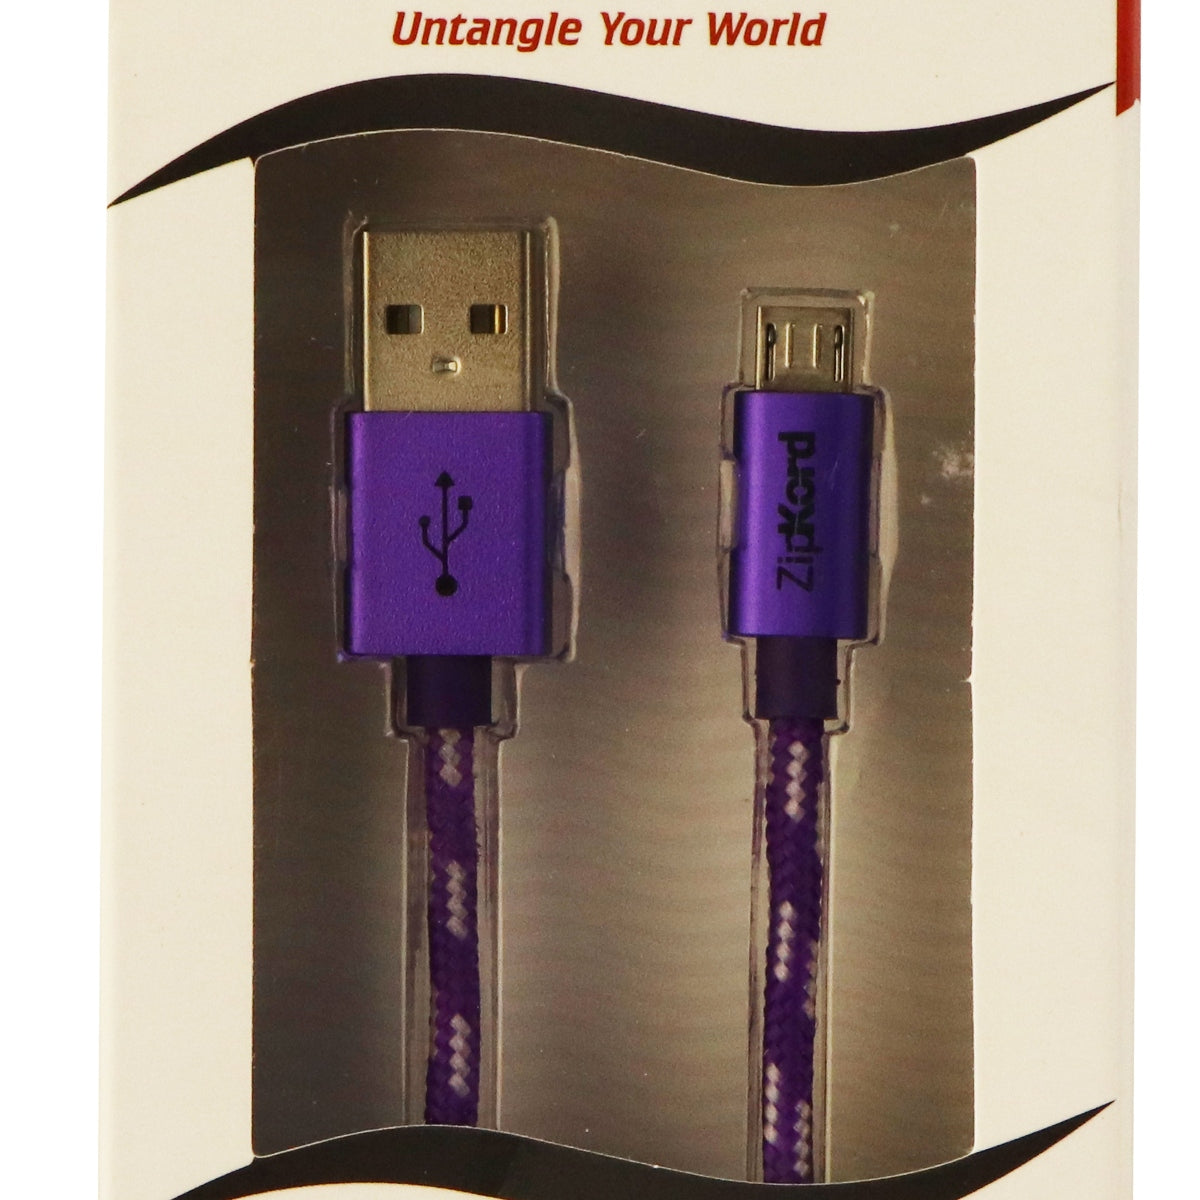 ZipKord (ZKCB5PEBL14) 3Ft Charge & Sync Data Cable for Micro USB Devices- Purple Cell Phone - Cables & Adapters ZipKord    - Simple Cell Bulk Wholesale Pricing - USA Seller